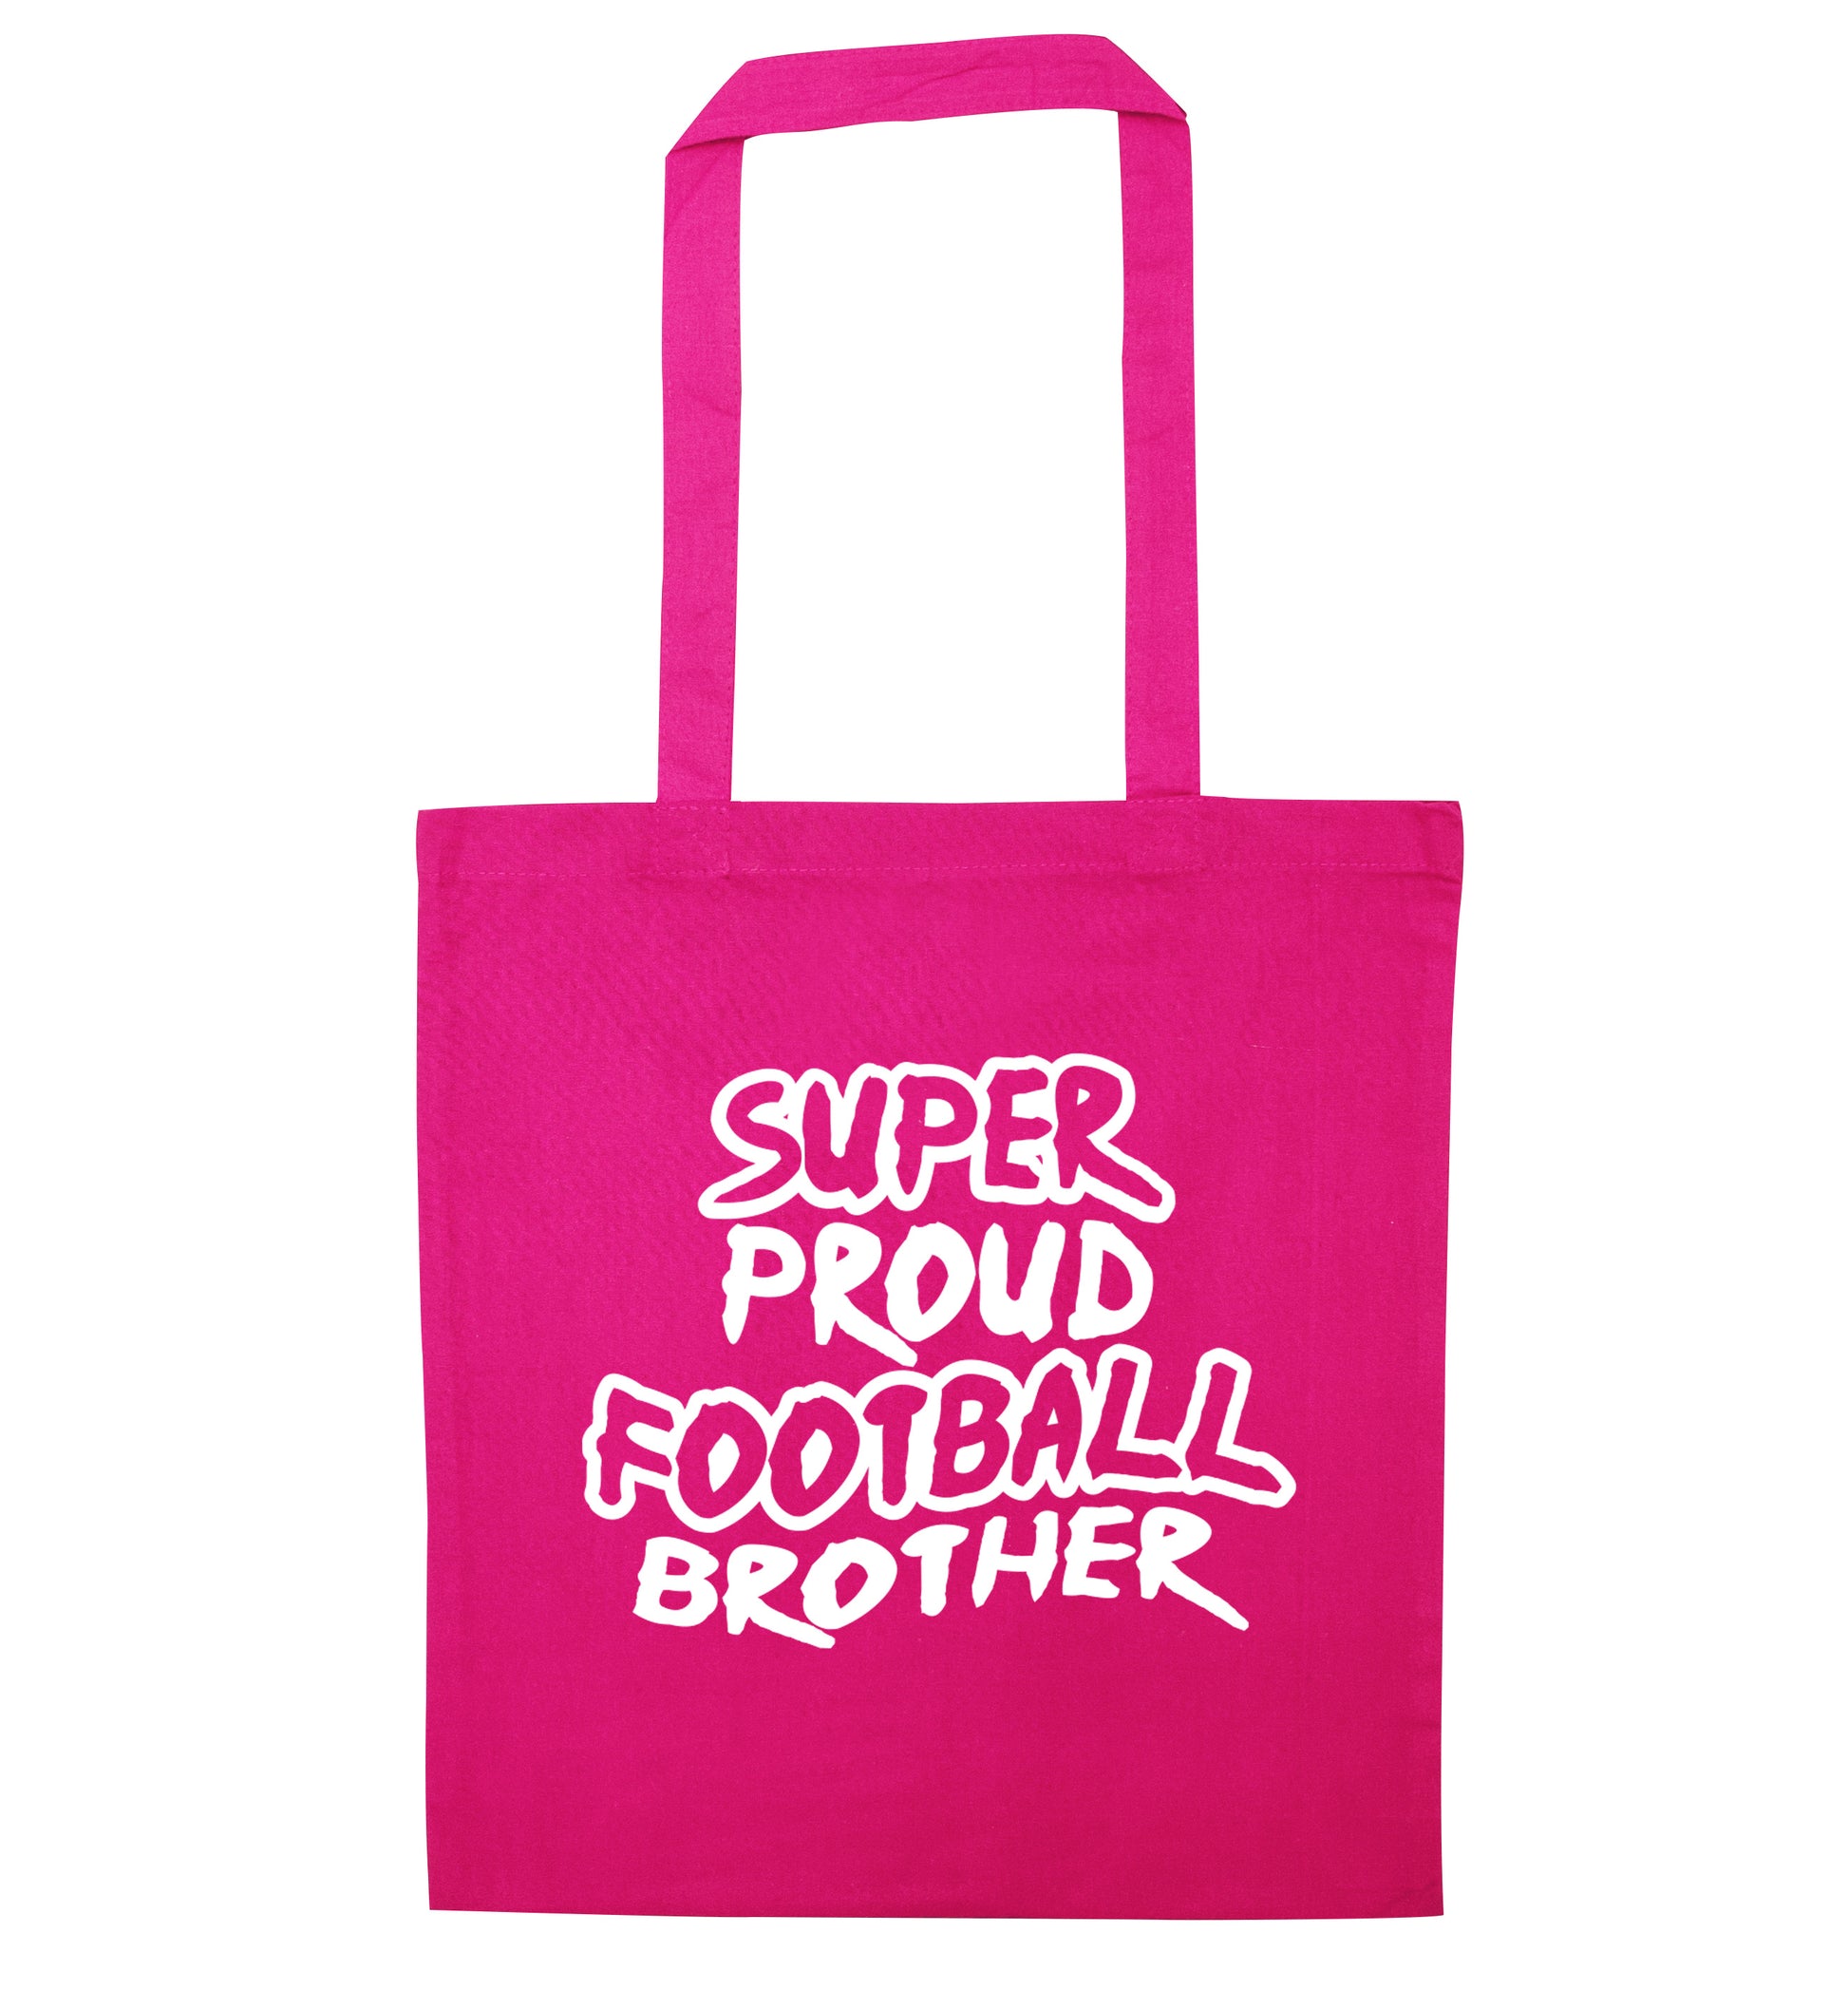 Super proud football brother pink tote bag